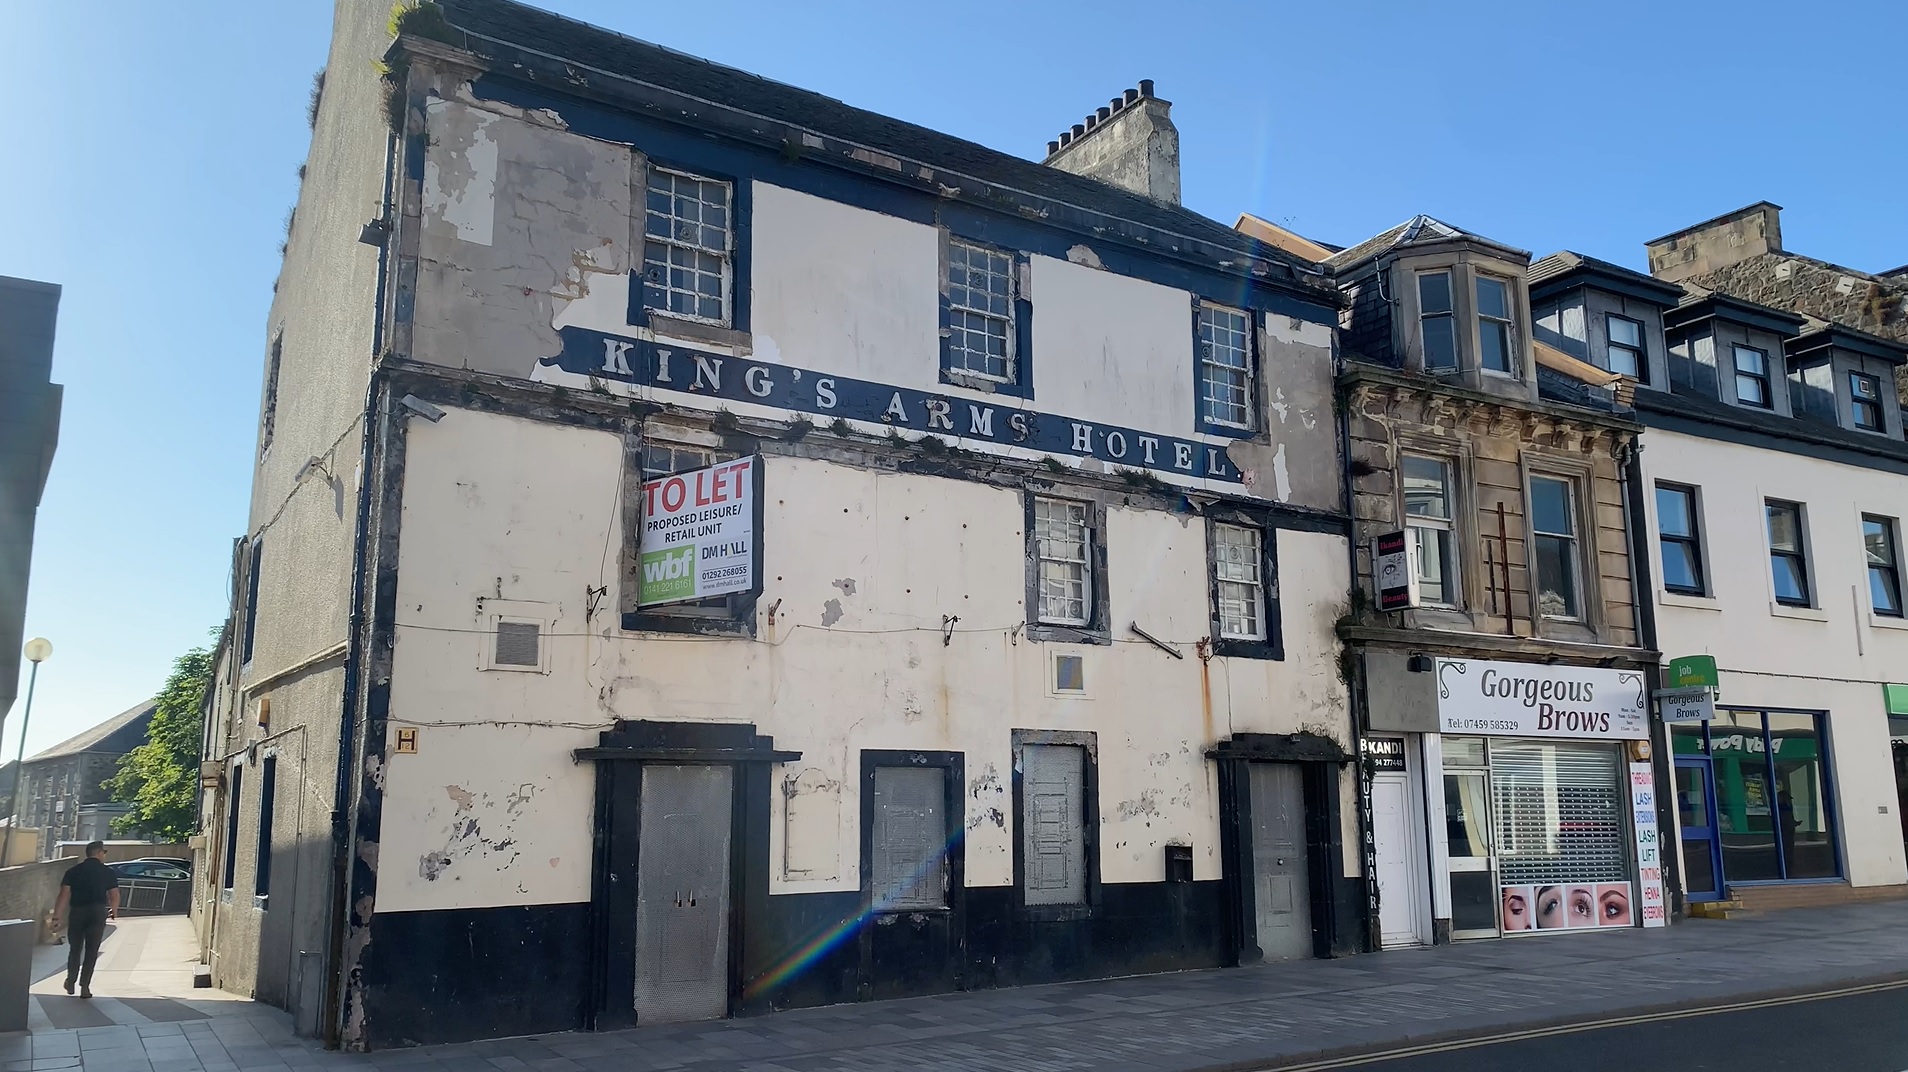 Views sought on housing plans for Irvine's former King’s Arms Hotel